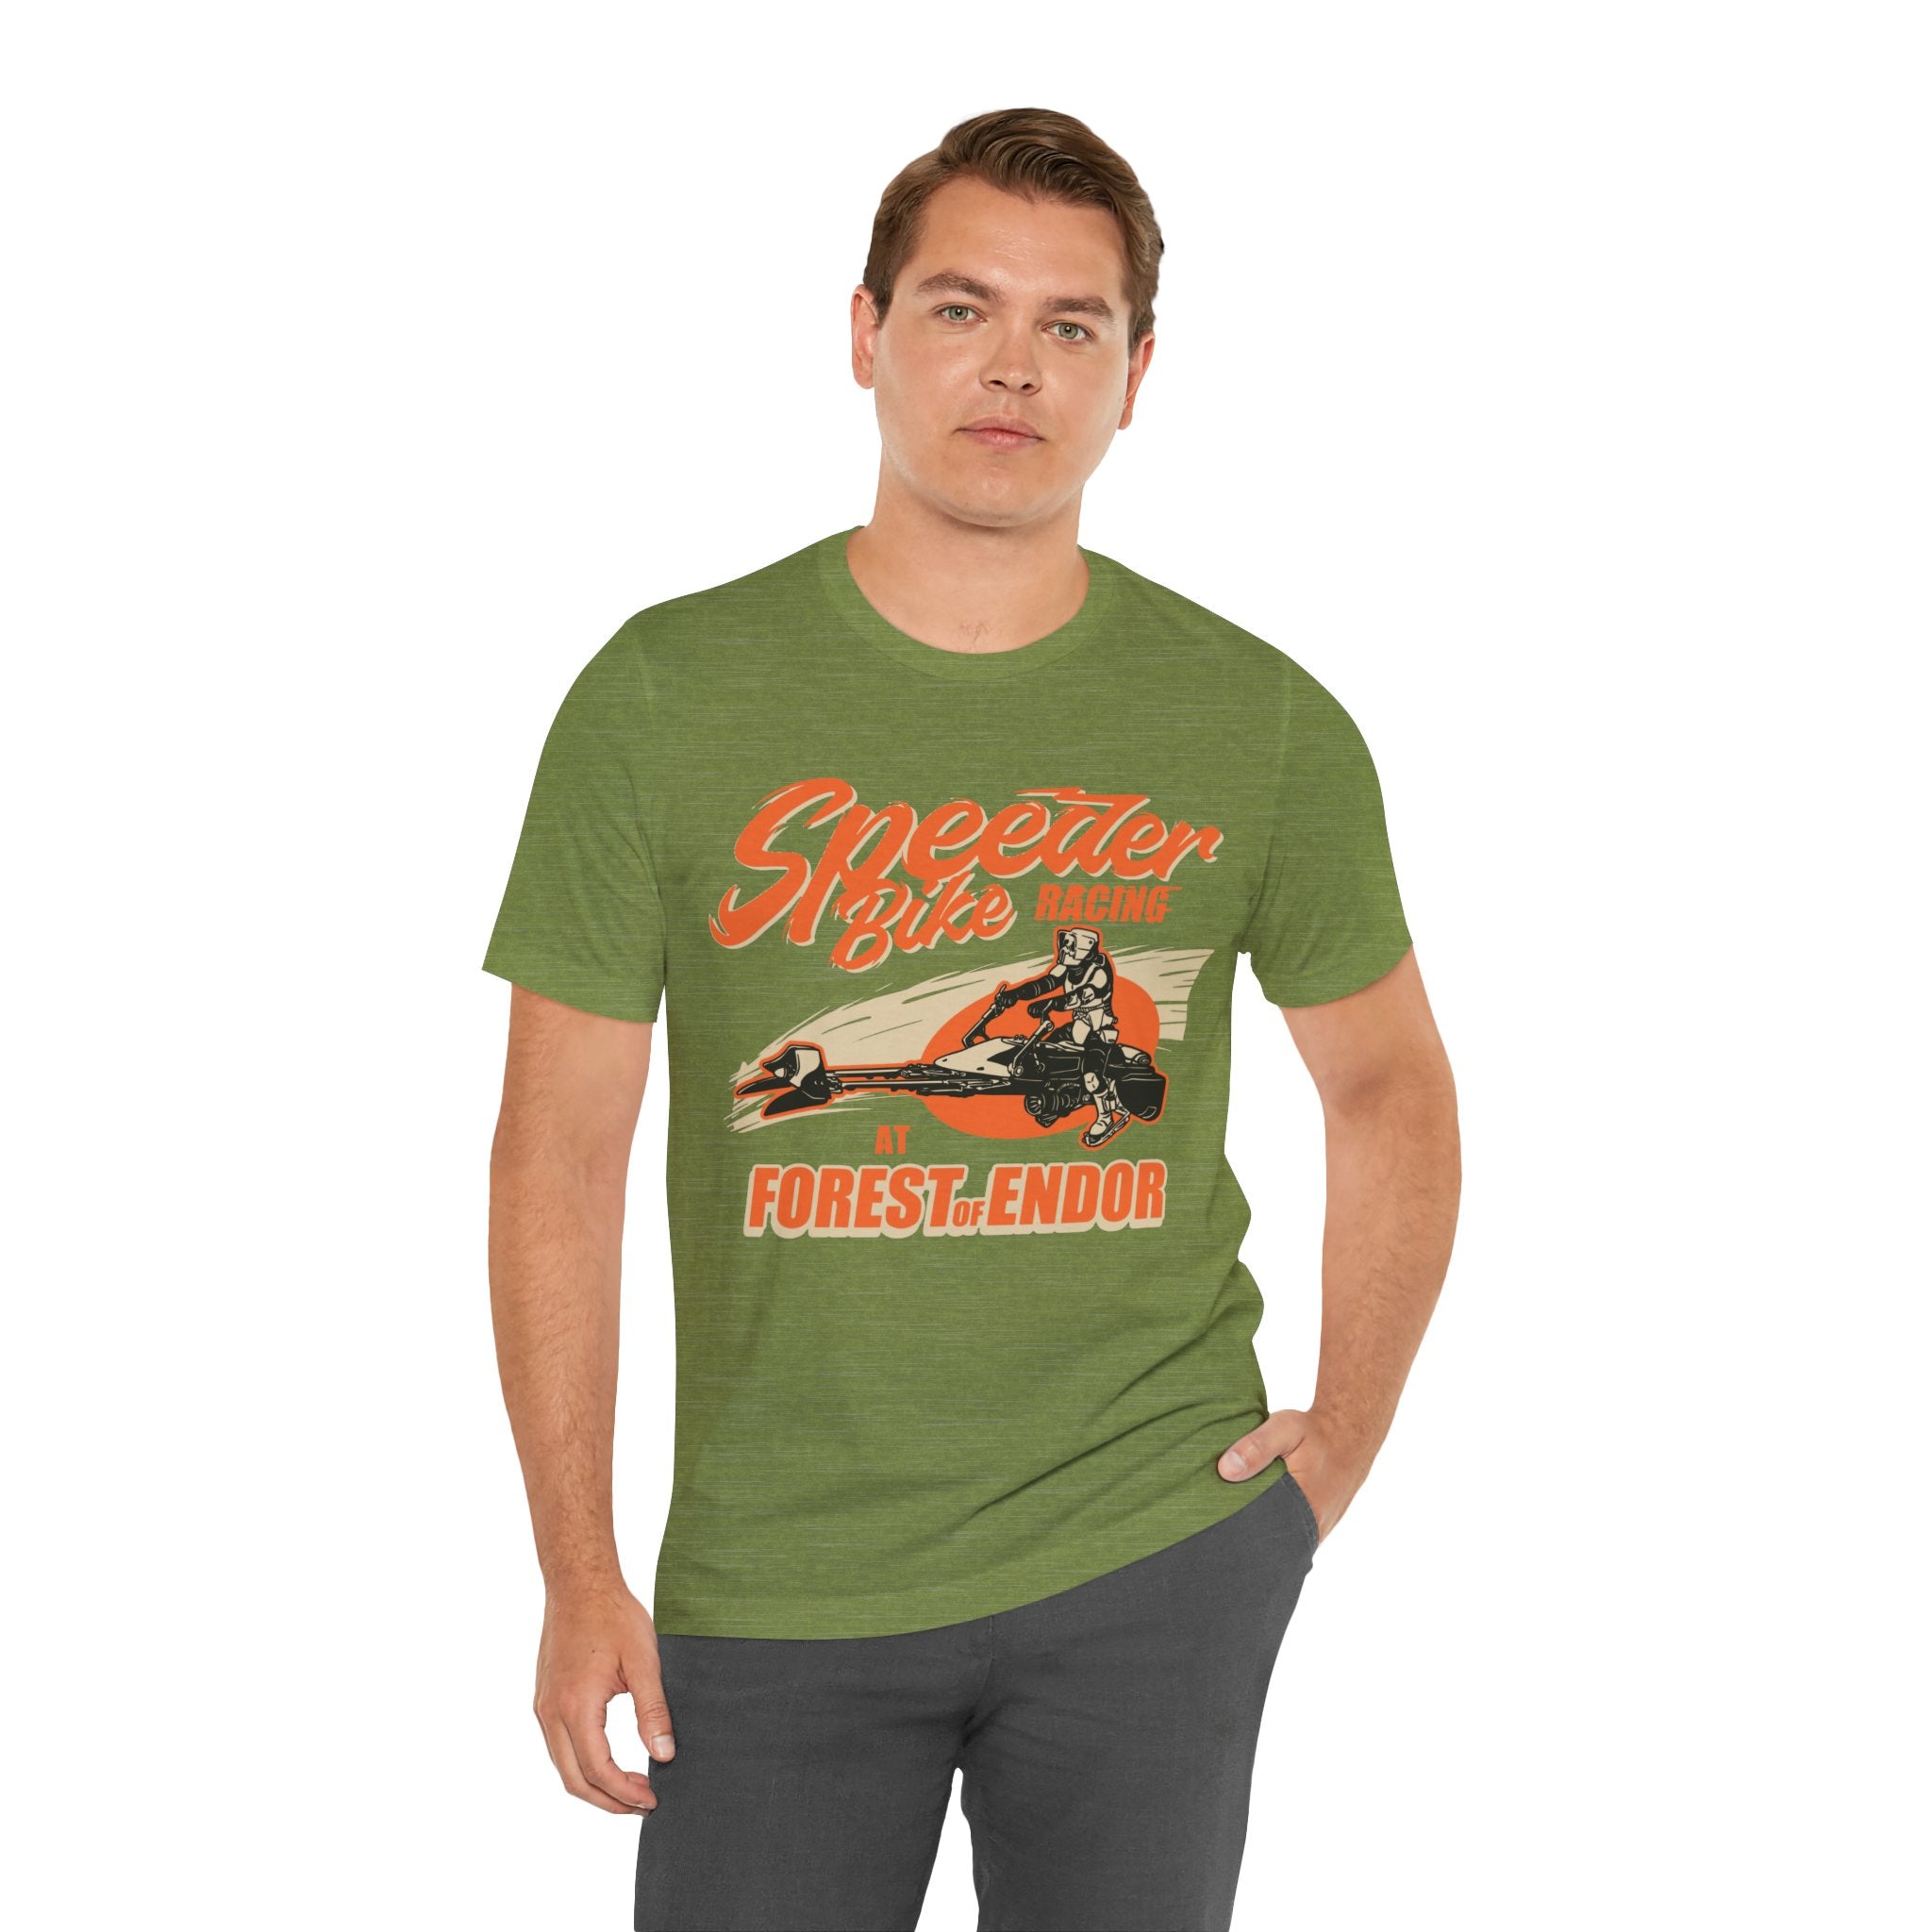 Sentence with Product Name: A man wearing a green jersey tee with a Speeder Bike Racing graphic print, standing against a plain background.